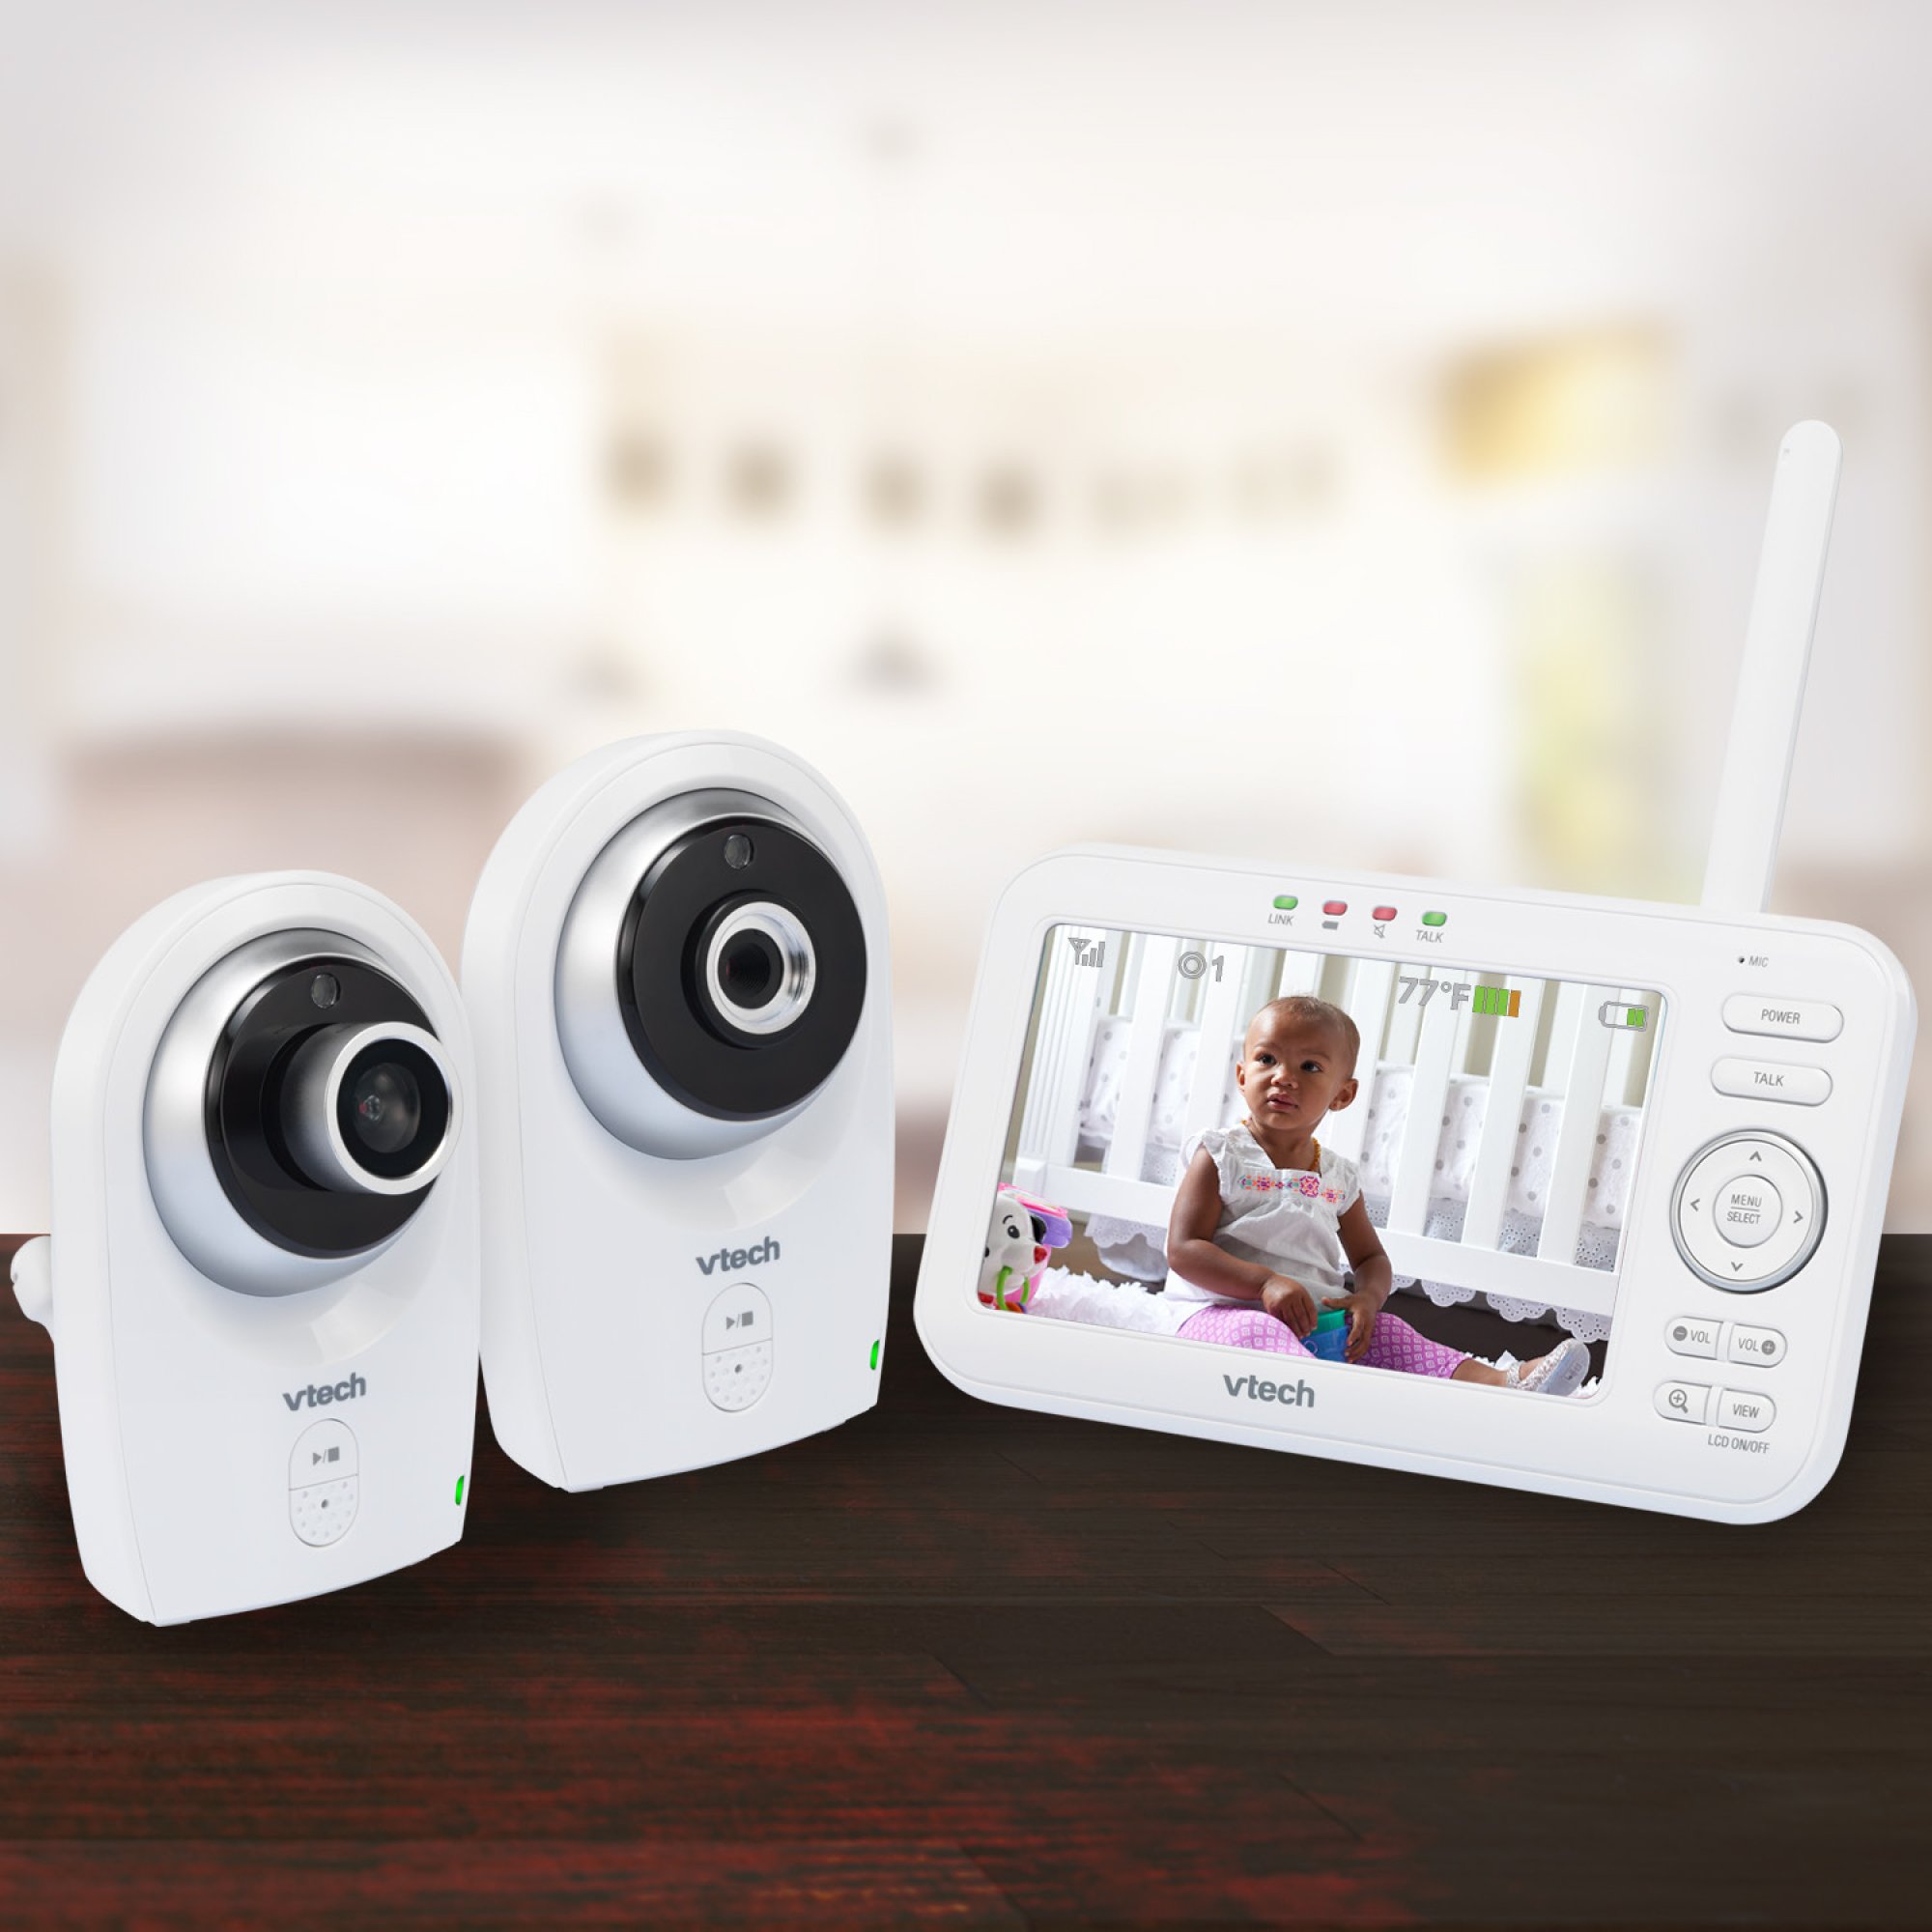 VTech VM351-2 Video Baby Monitor with Interchangeable Wide-Angle Optical Lens and Standard Optical Lens, 720p